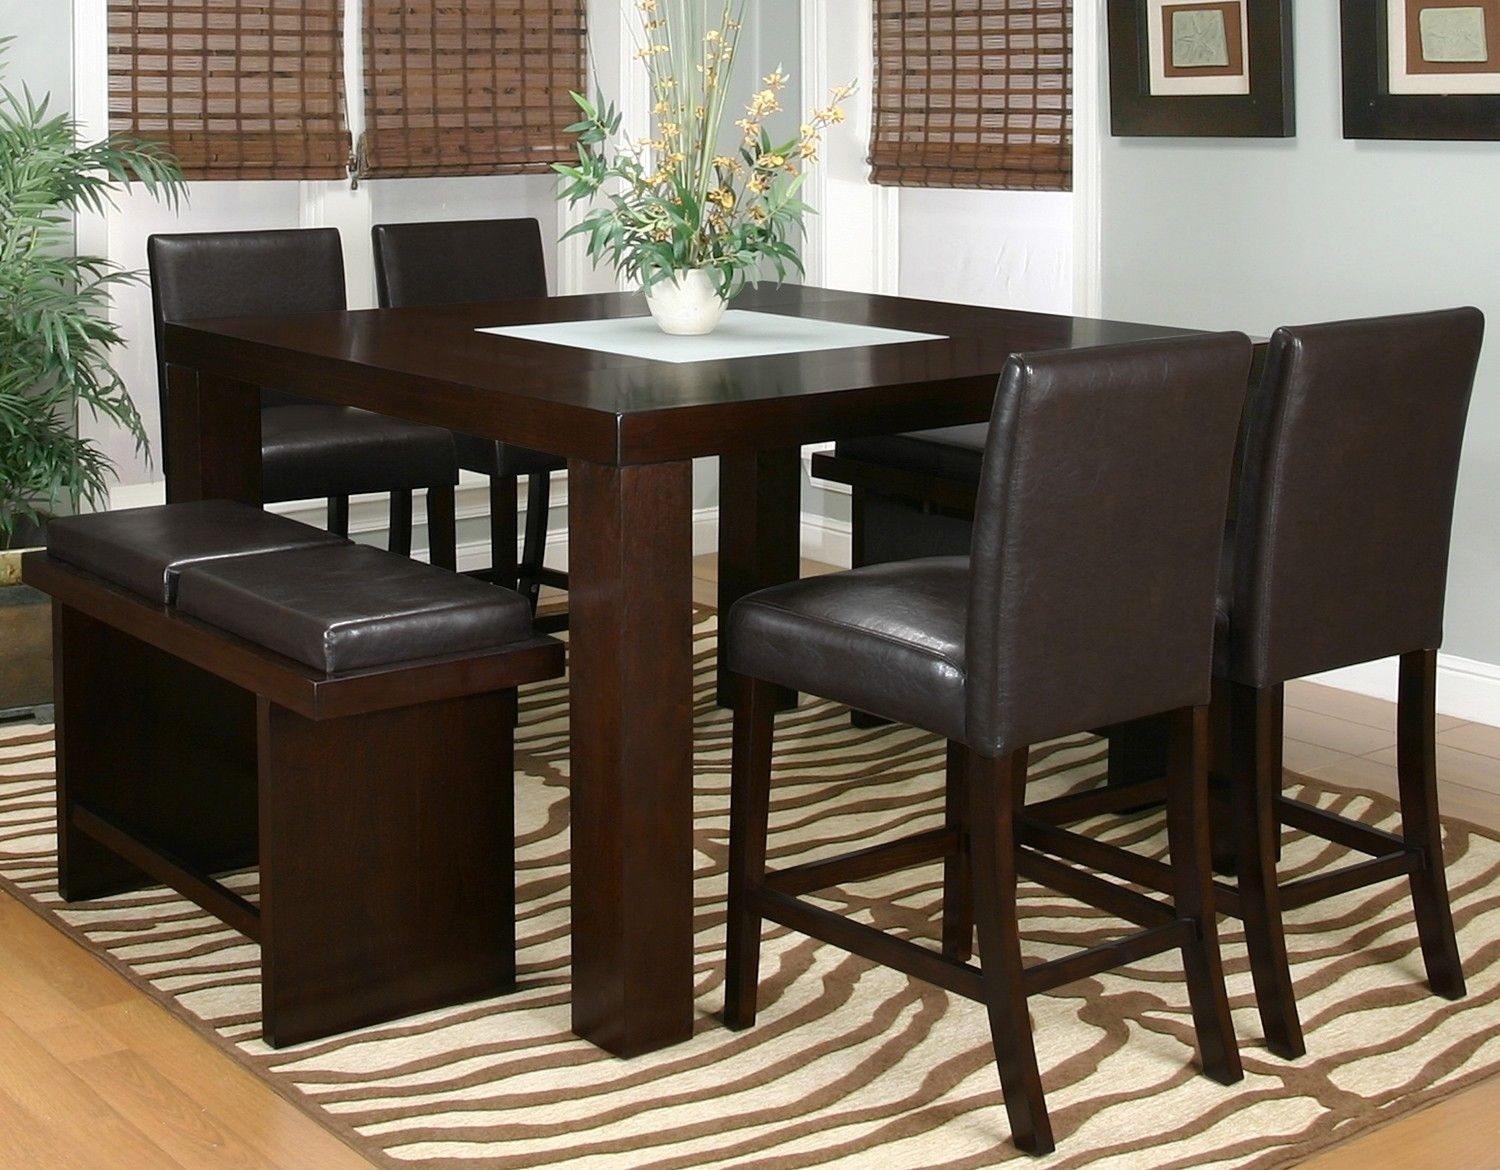 Unique counter height dining sets 18